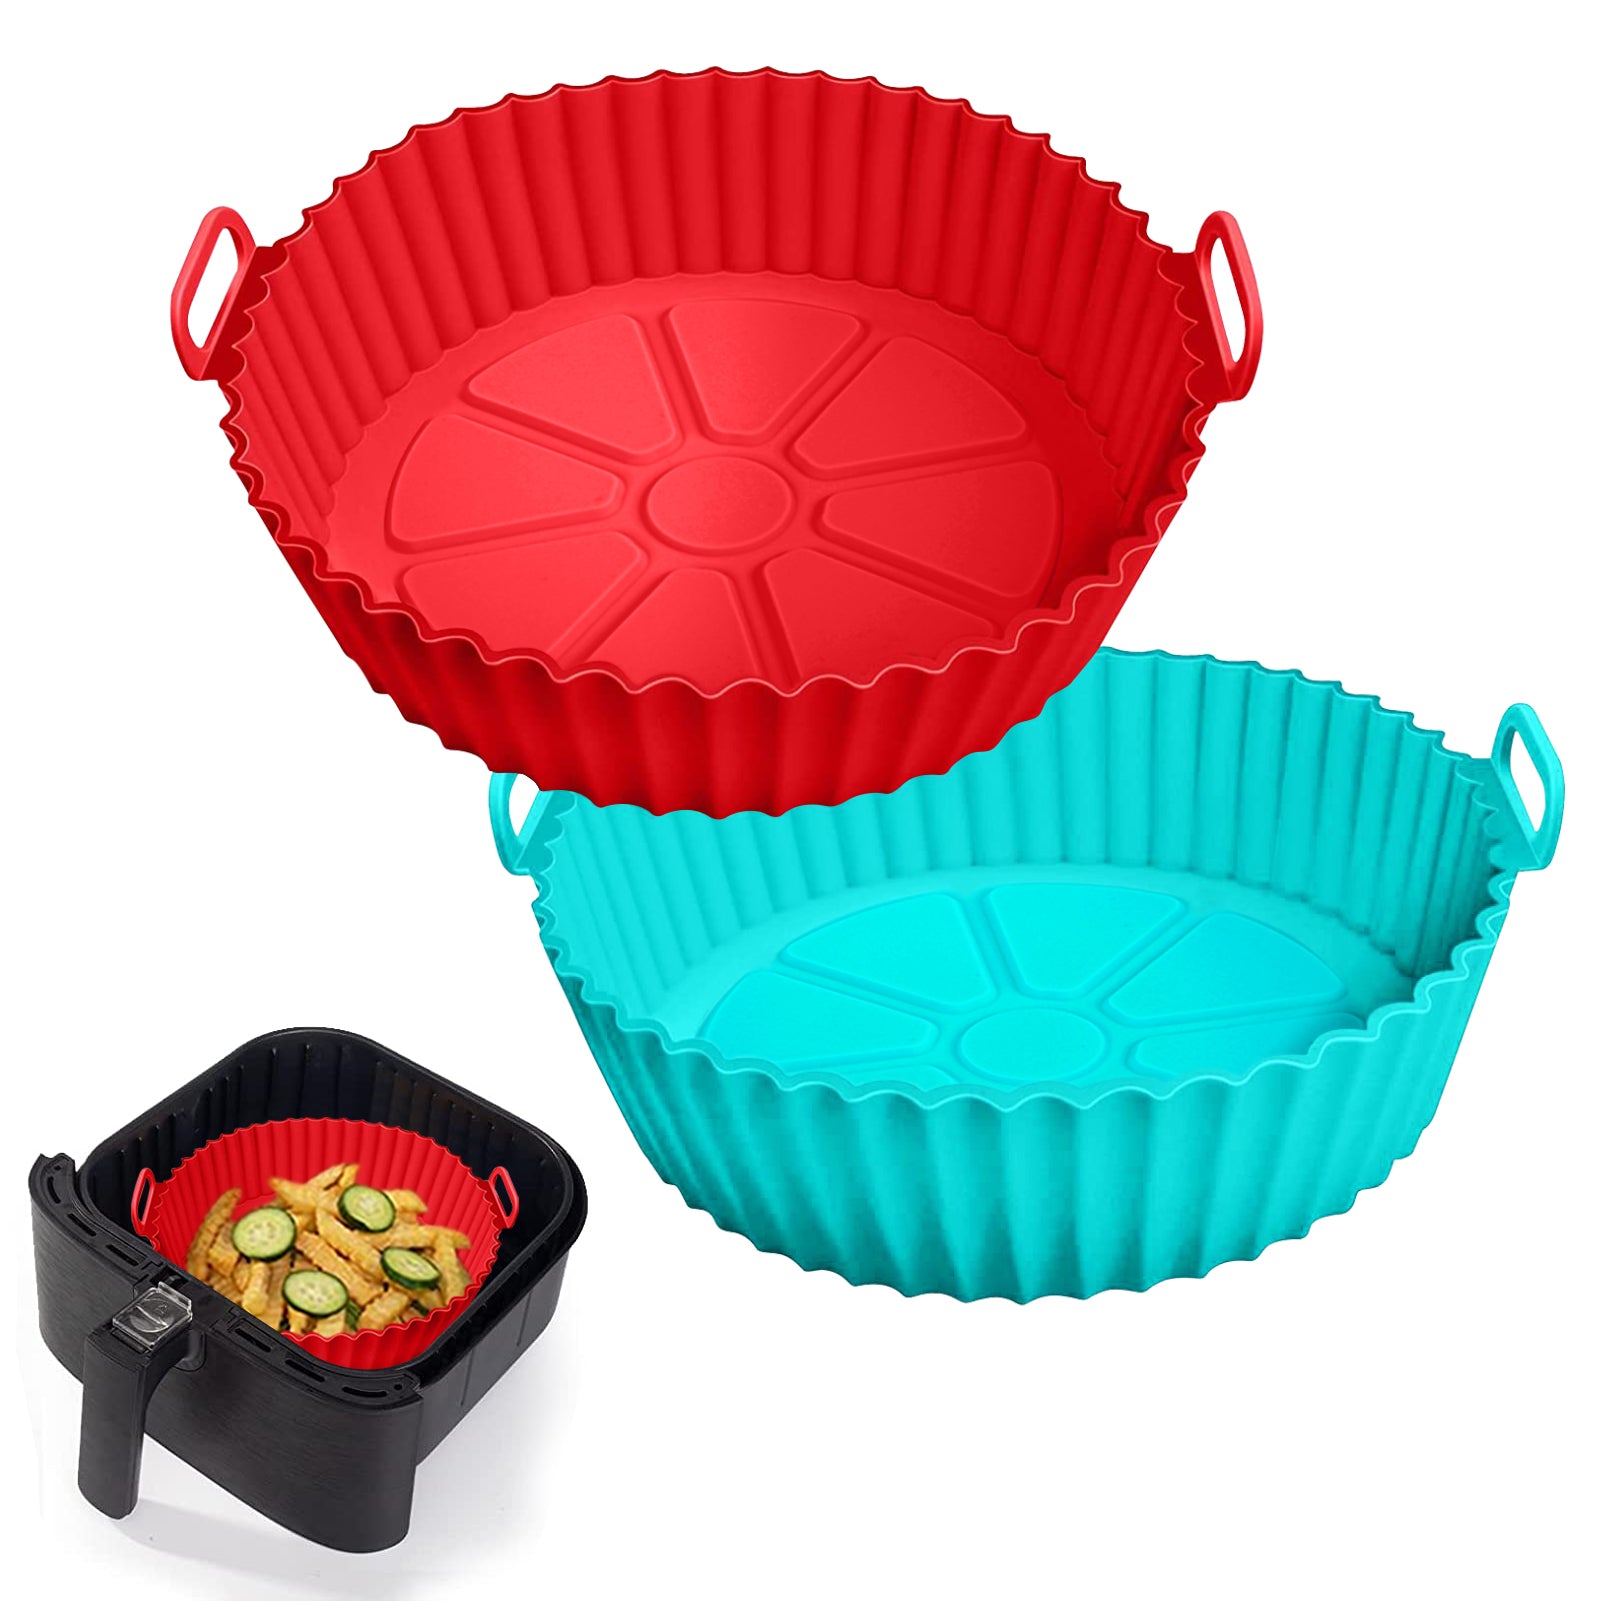 Liners for Air Fryer, Reusable Air Fryer Silicone Liners, Round Air Fryer Basket Insert, Non-Stick Airfryer Pot for 3qt to 5 qt Air Fryer Accessories